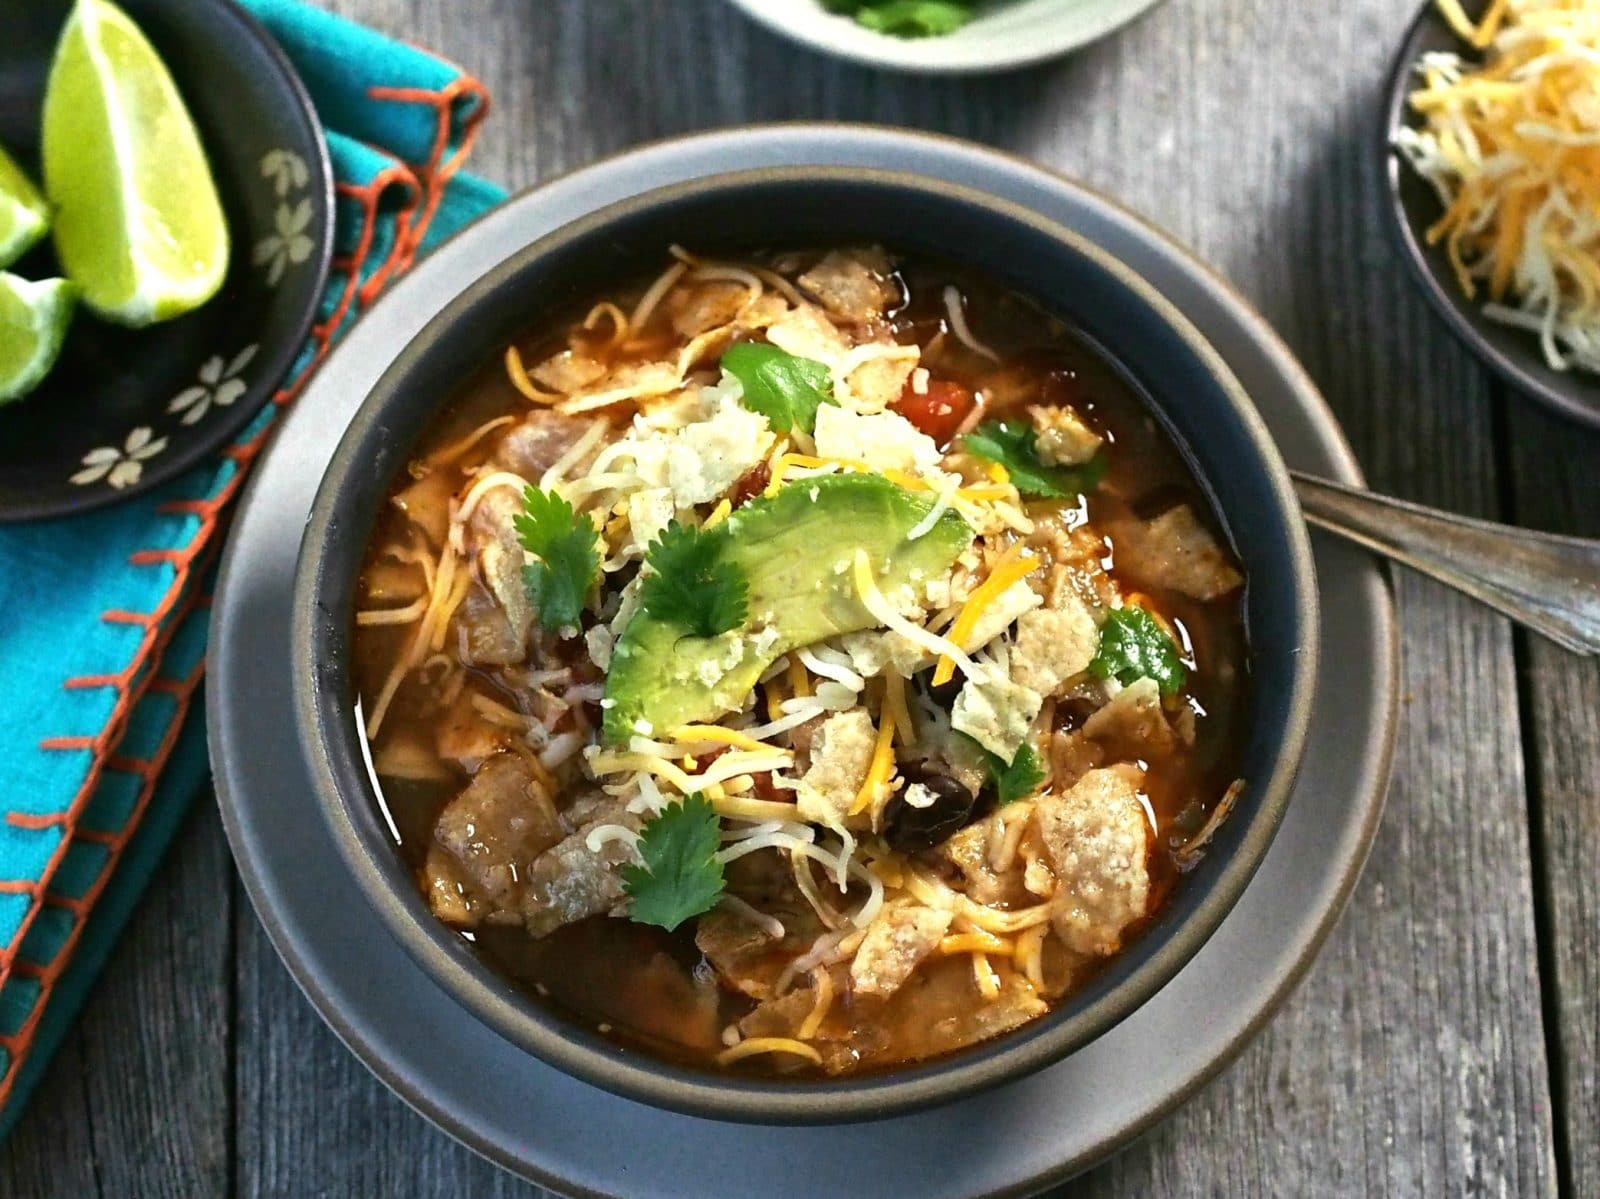 Chicken Tortilla Soup - chicken, beans, tomatoes and Mexican spices simmered together and topped with tortilla chips, cheese & sour cream. So delicious! Simply Sated